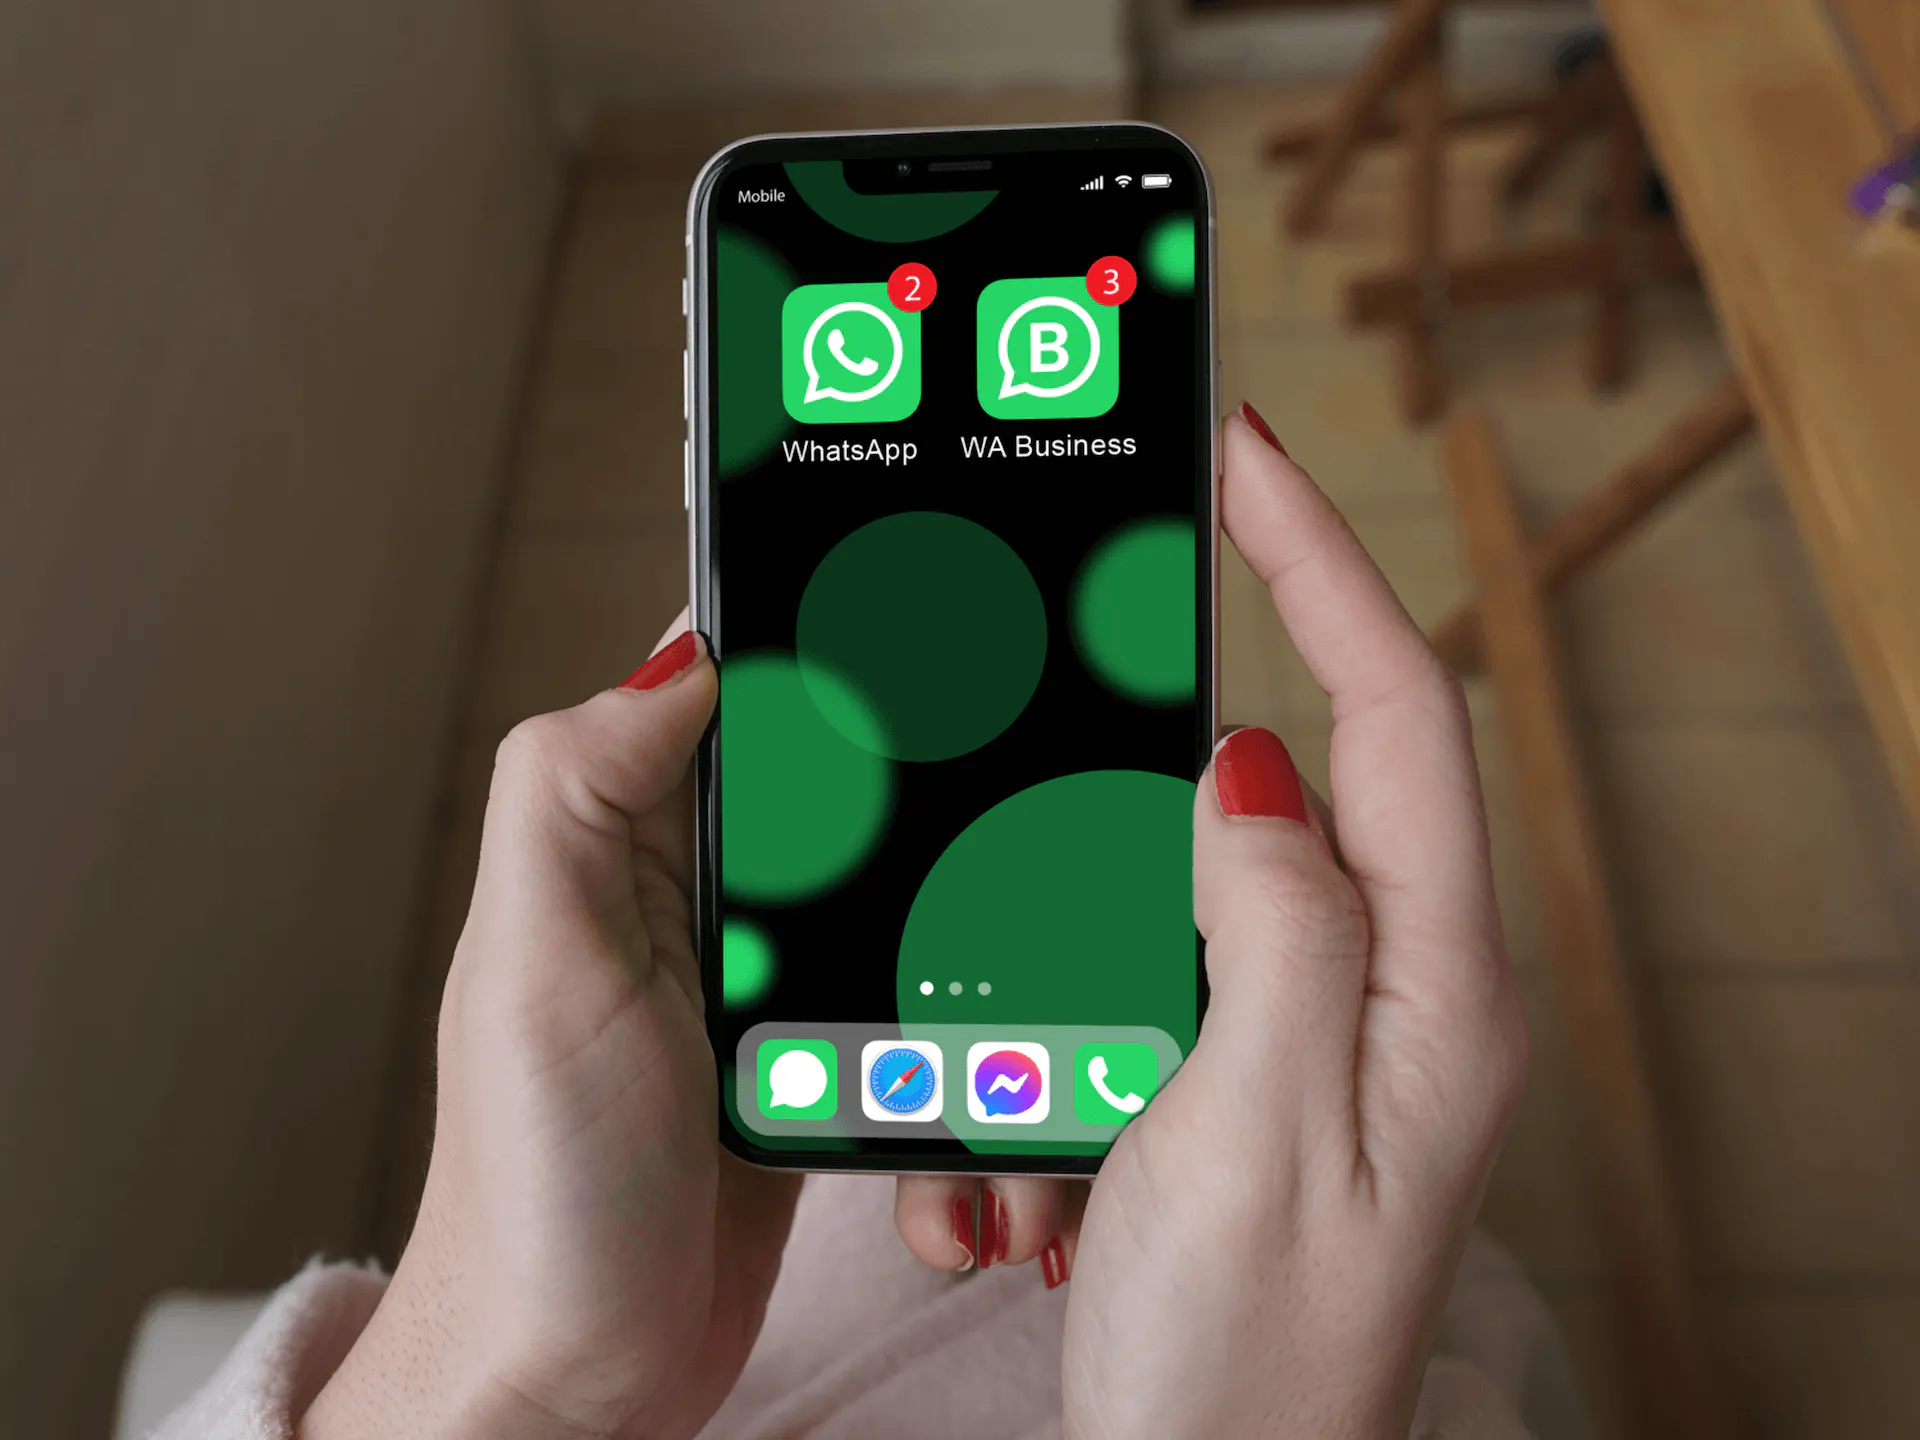 hands holding a phone with WhatsApp and WhatsApp Business installed on it